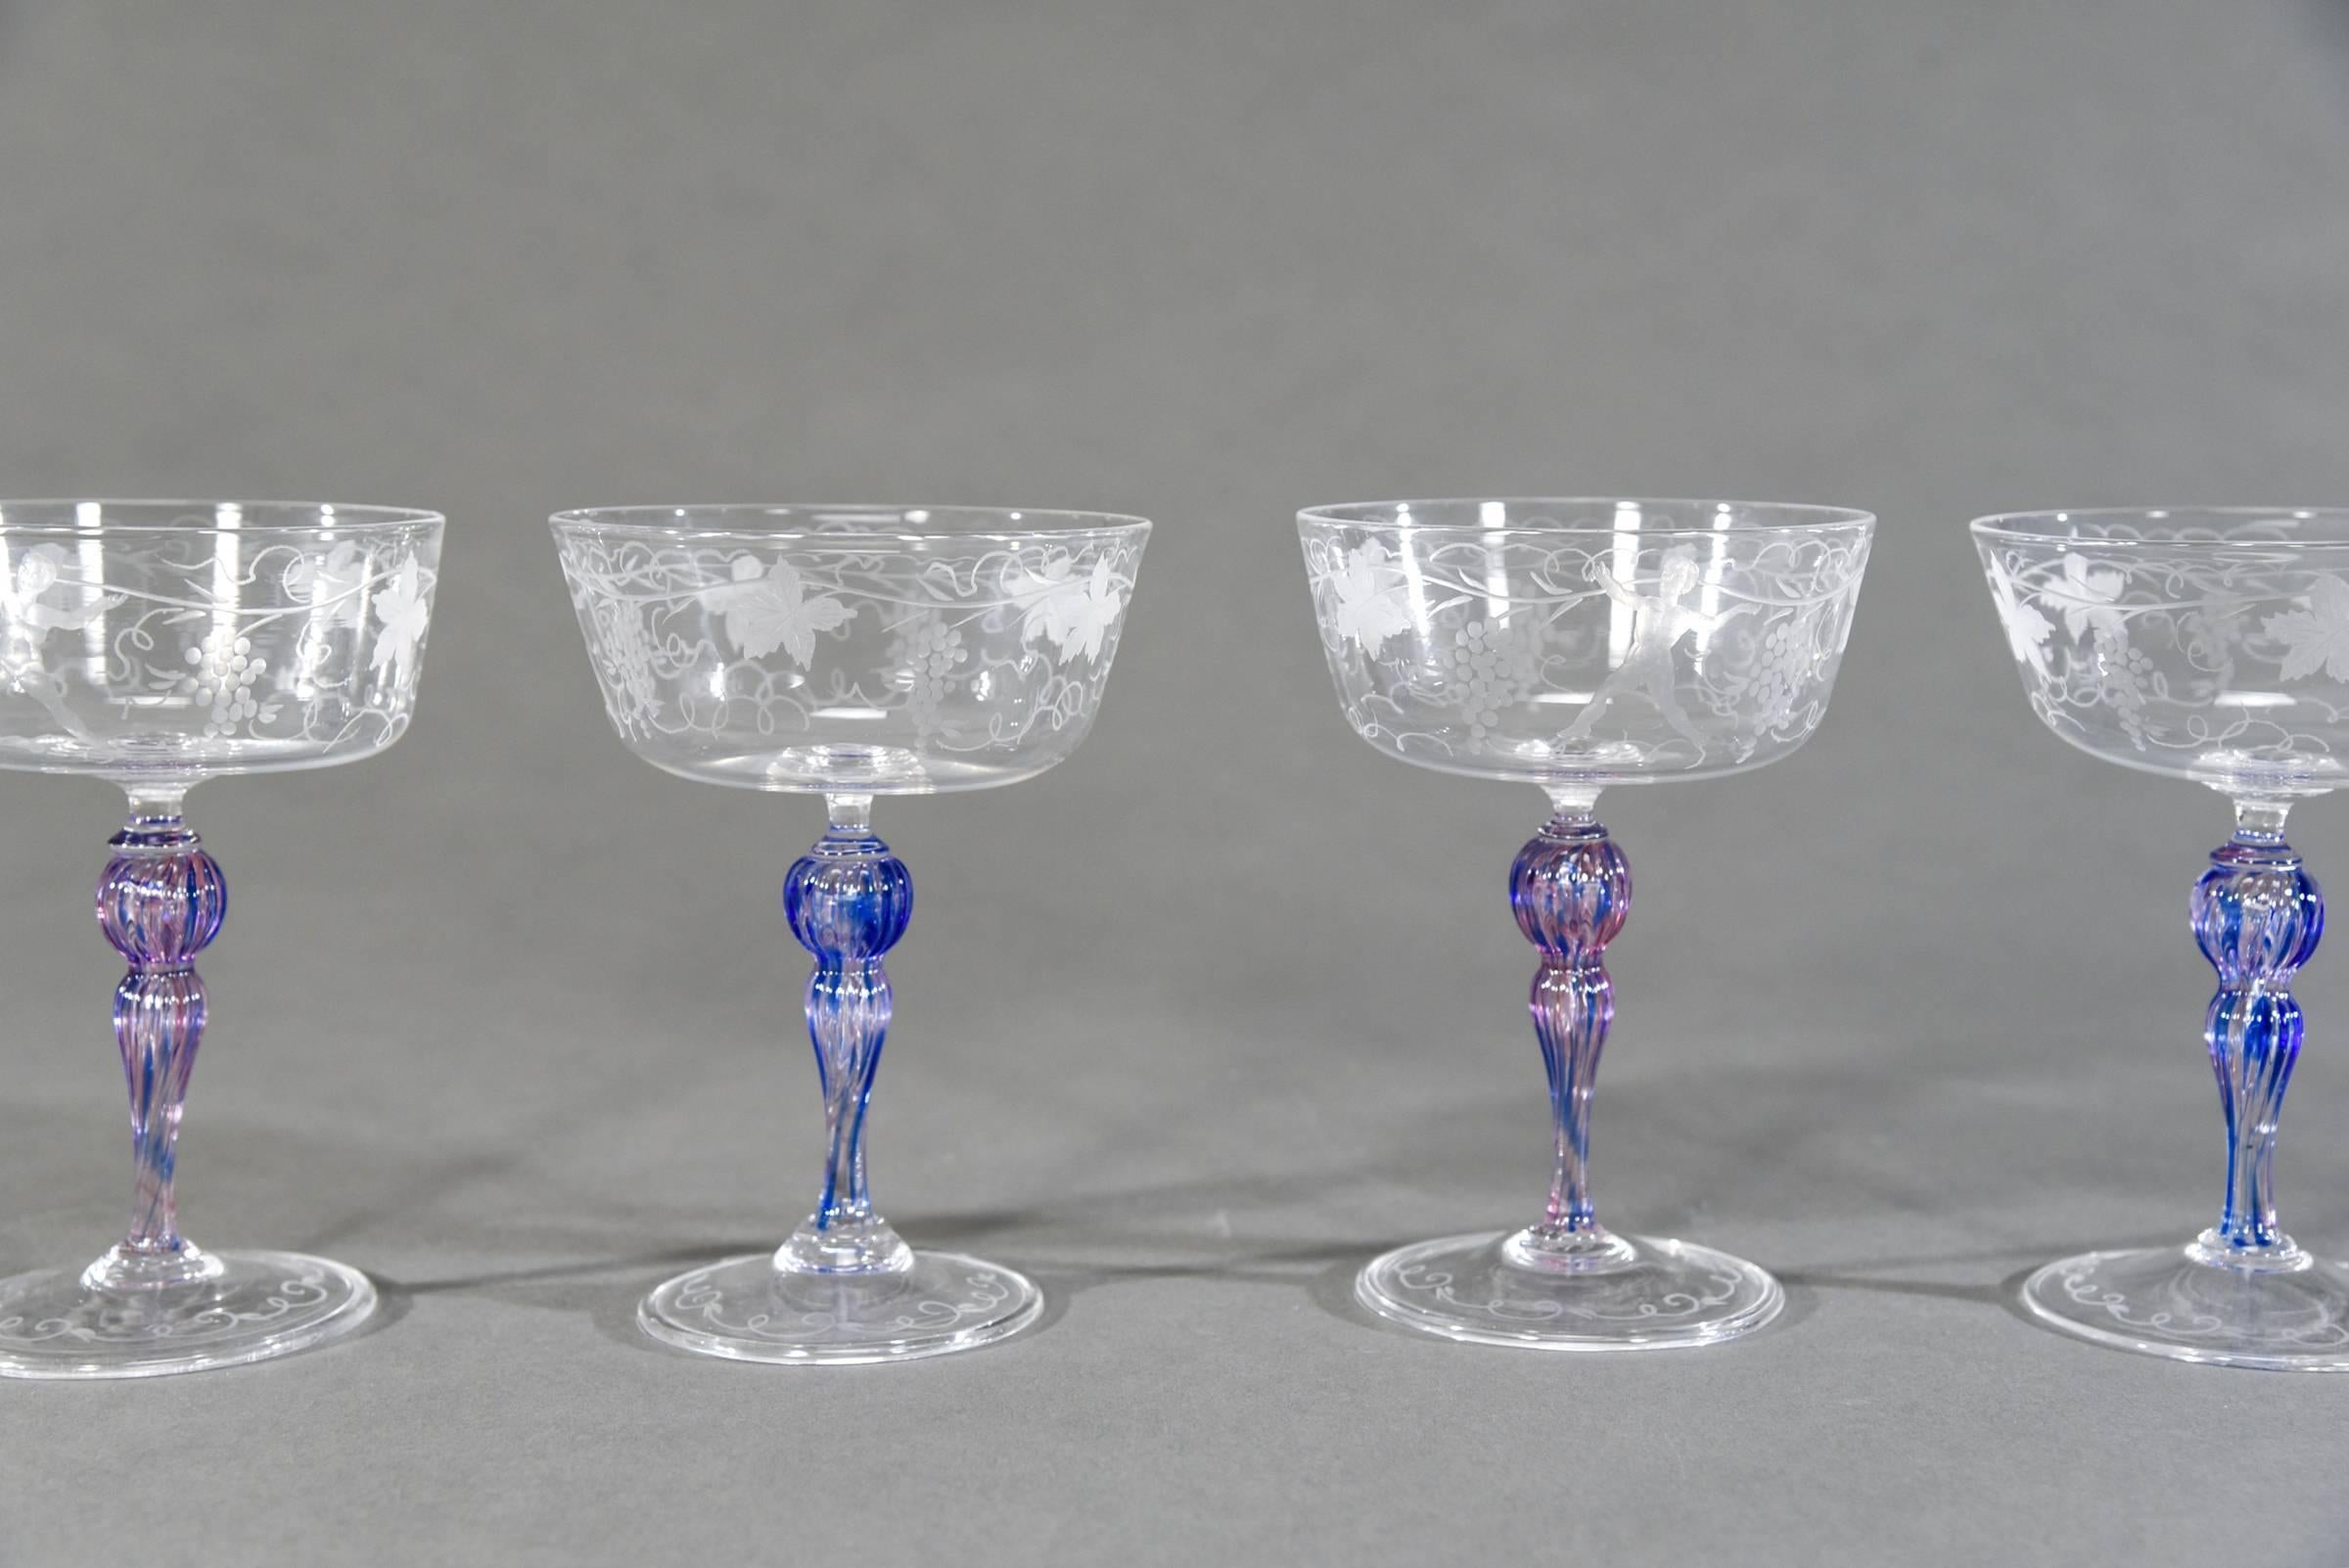 What a fabulous grouping of 15 hand blown Venetian champagne coupes and also perfect for your favorite martini! Each one is engraved with grapes, leaves and vines surrounding the bowl, interspersed with young Bacchus figures romping through the